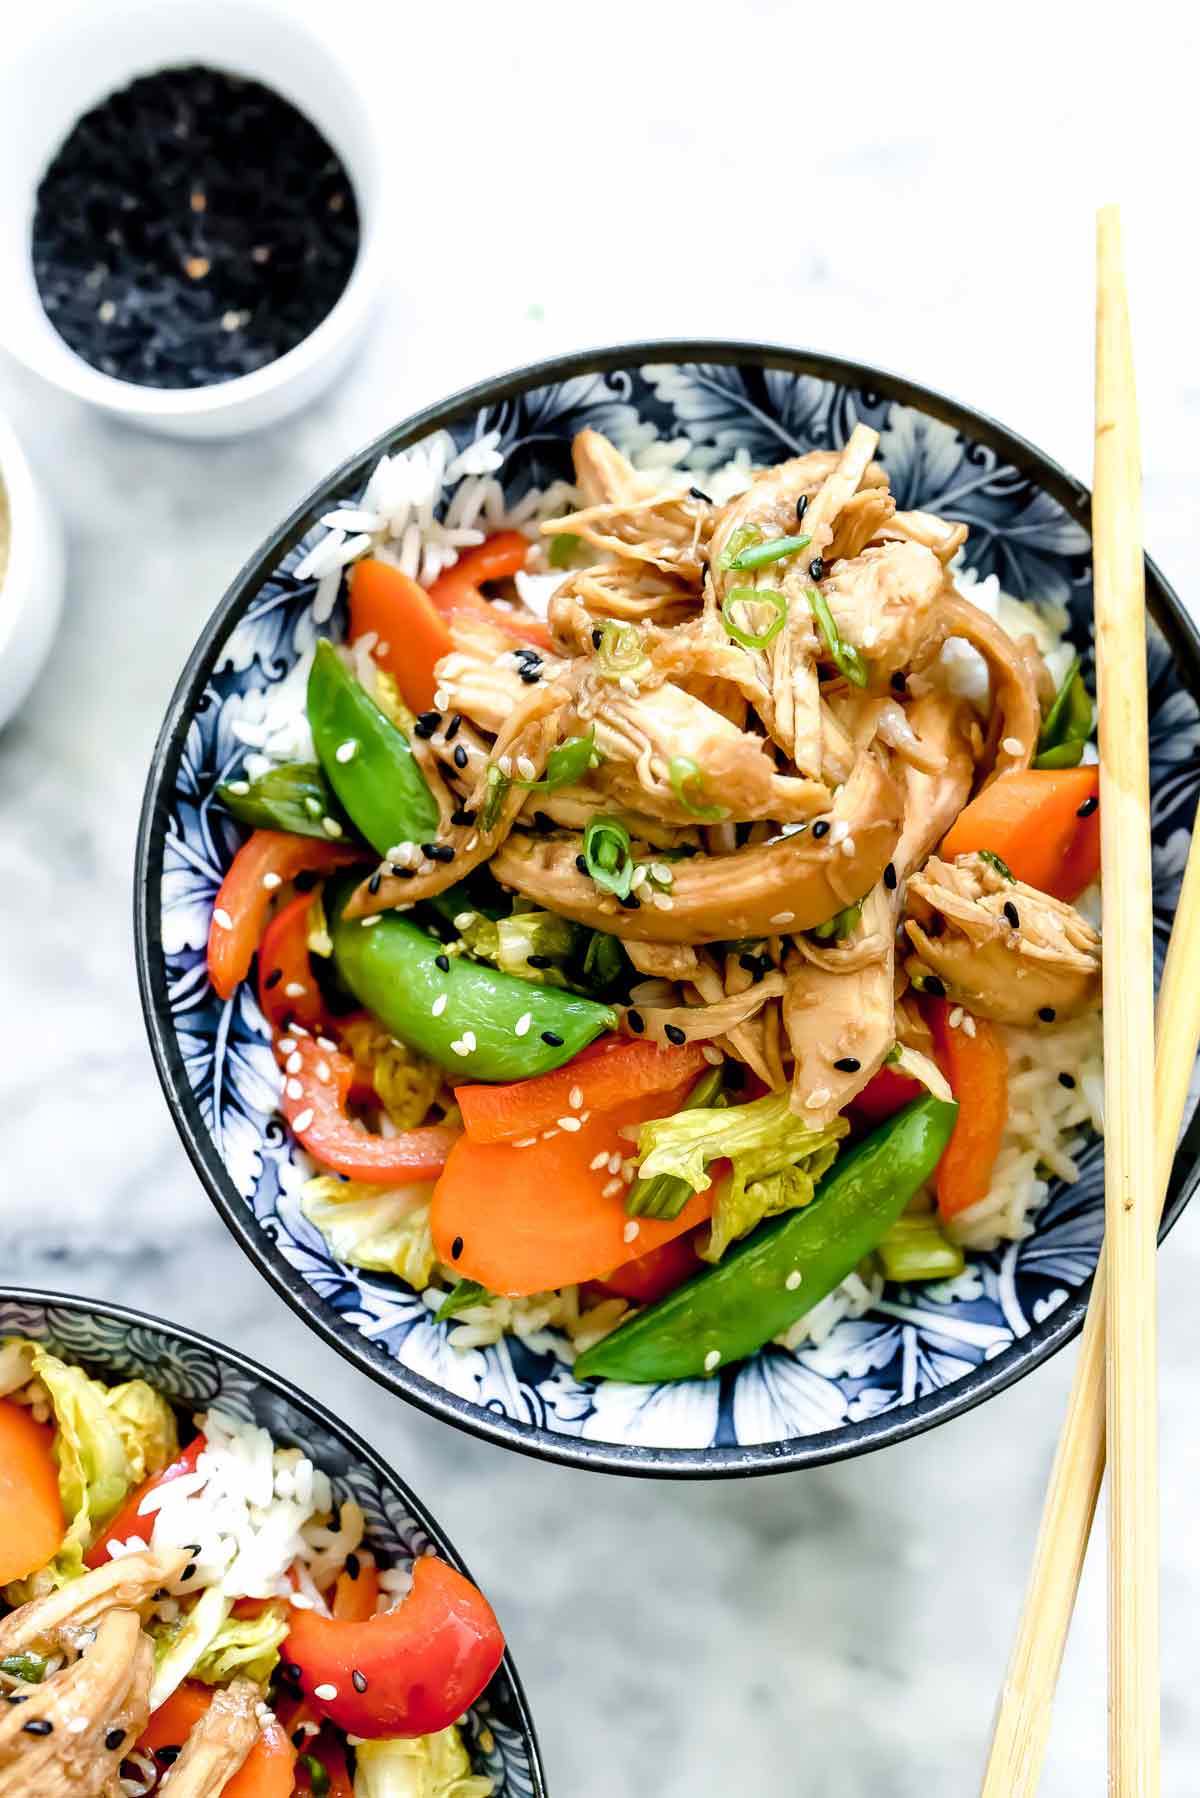 Slow Cooker Teriyaki Chicken and Vegetable Rice Bowls from foodiecrush.com on foodiecrush.com